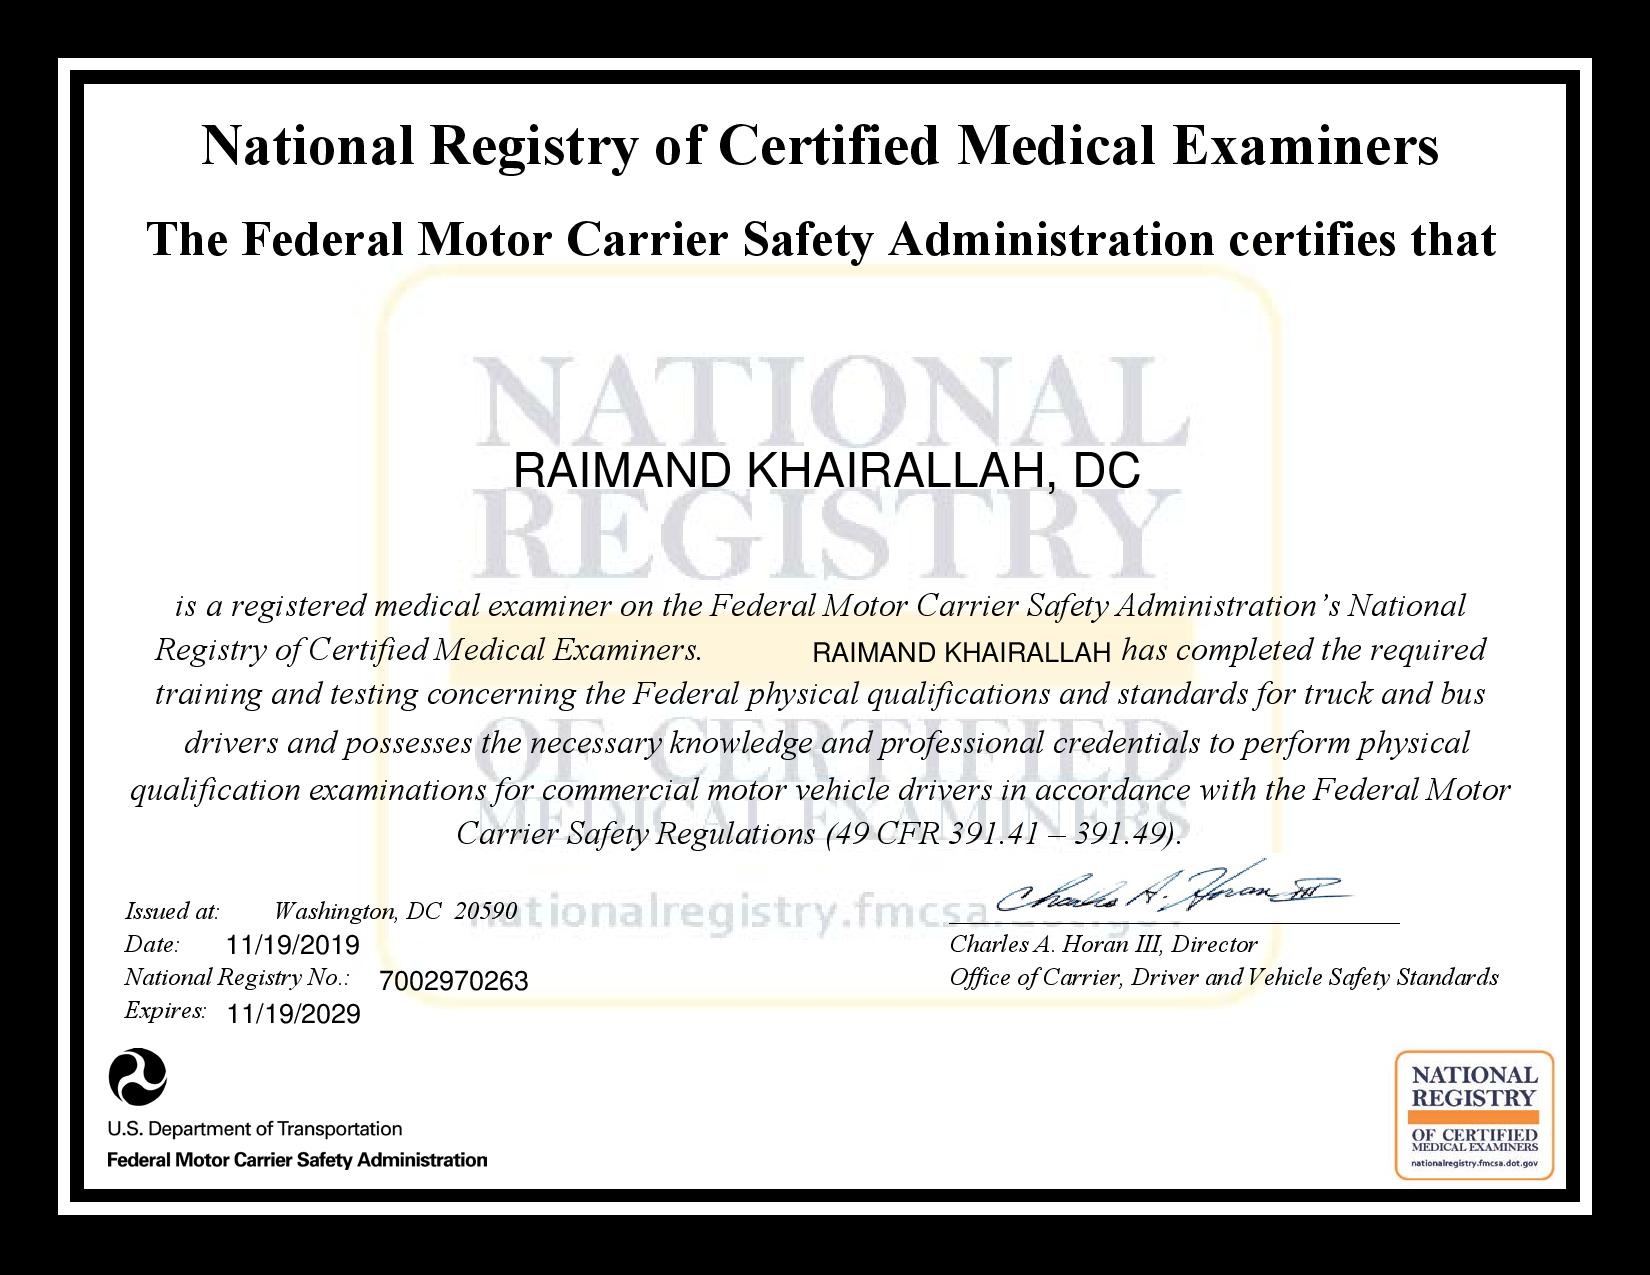 DOT7002970263 certificate page 001